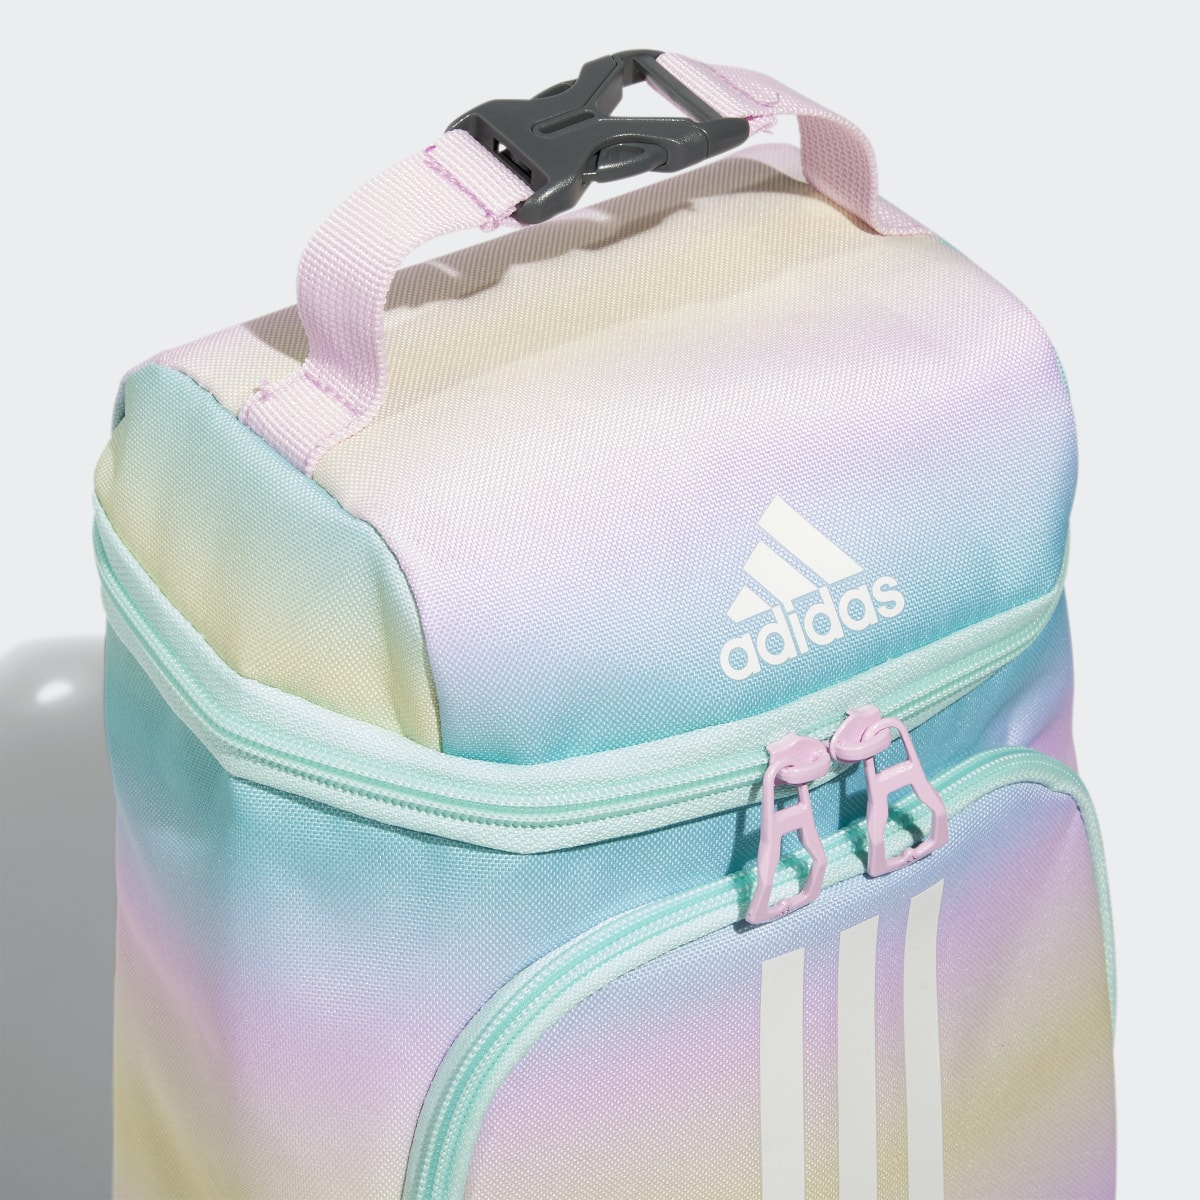 Adidas Excel Lunch Bag. 6